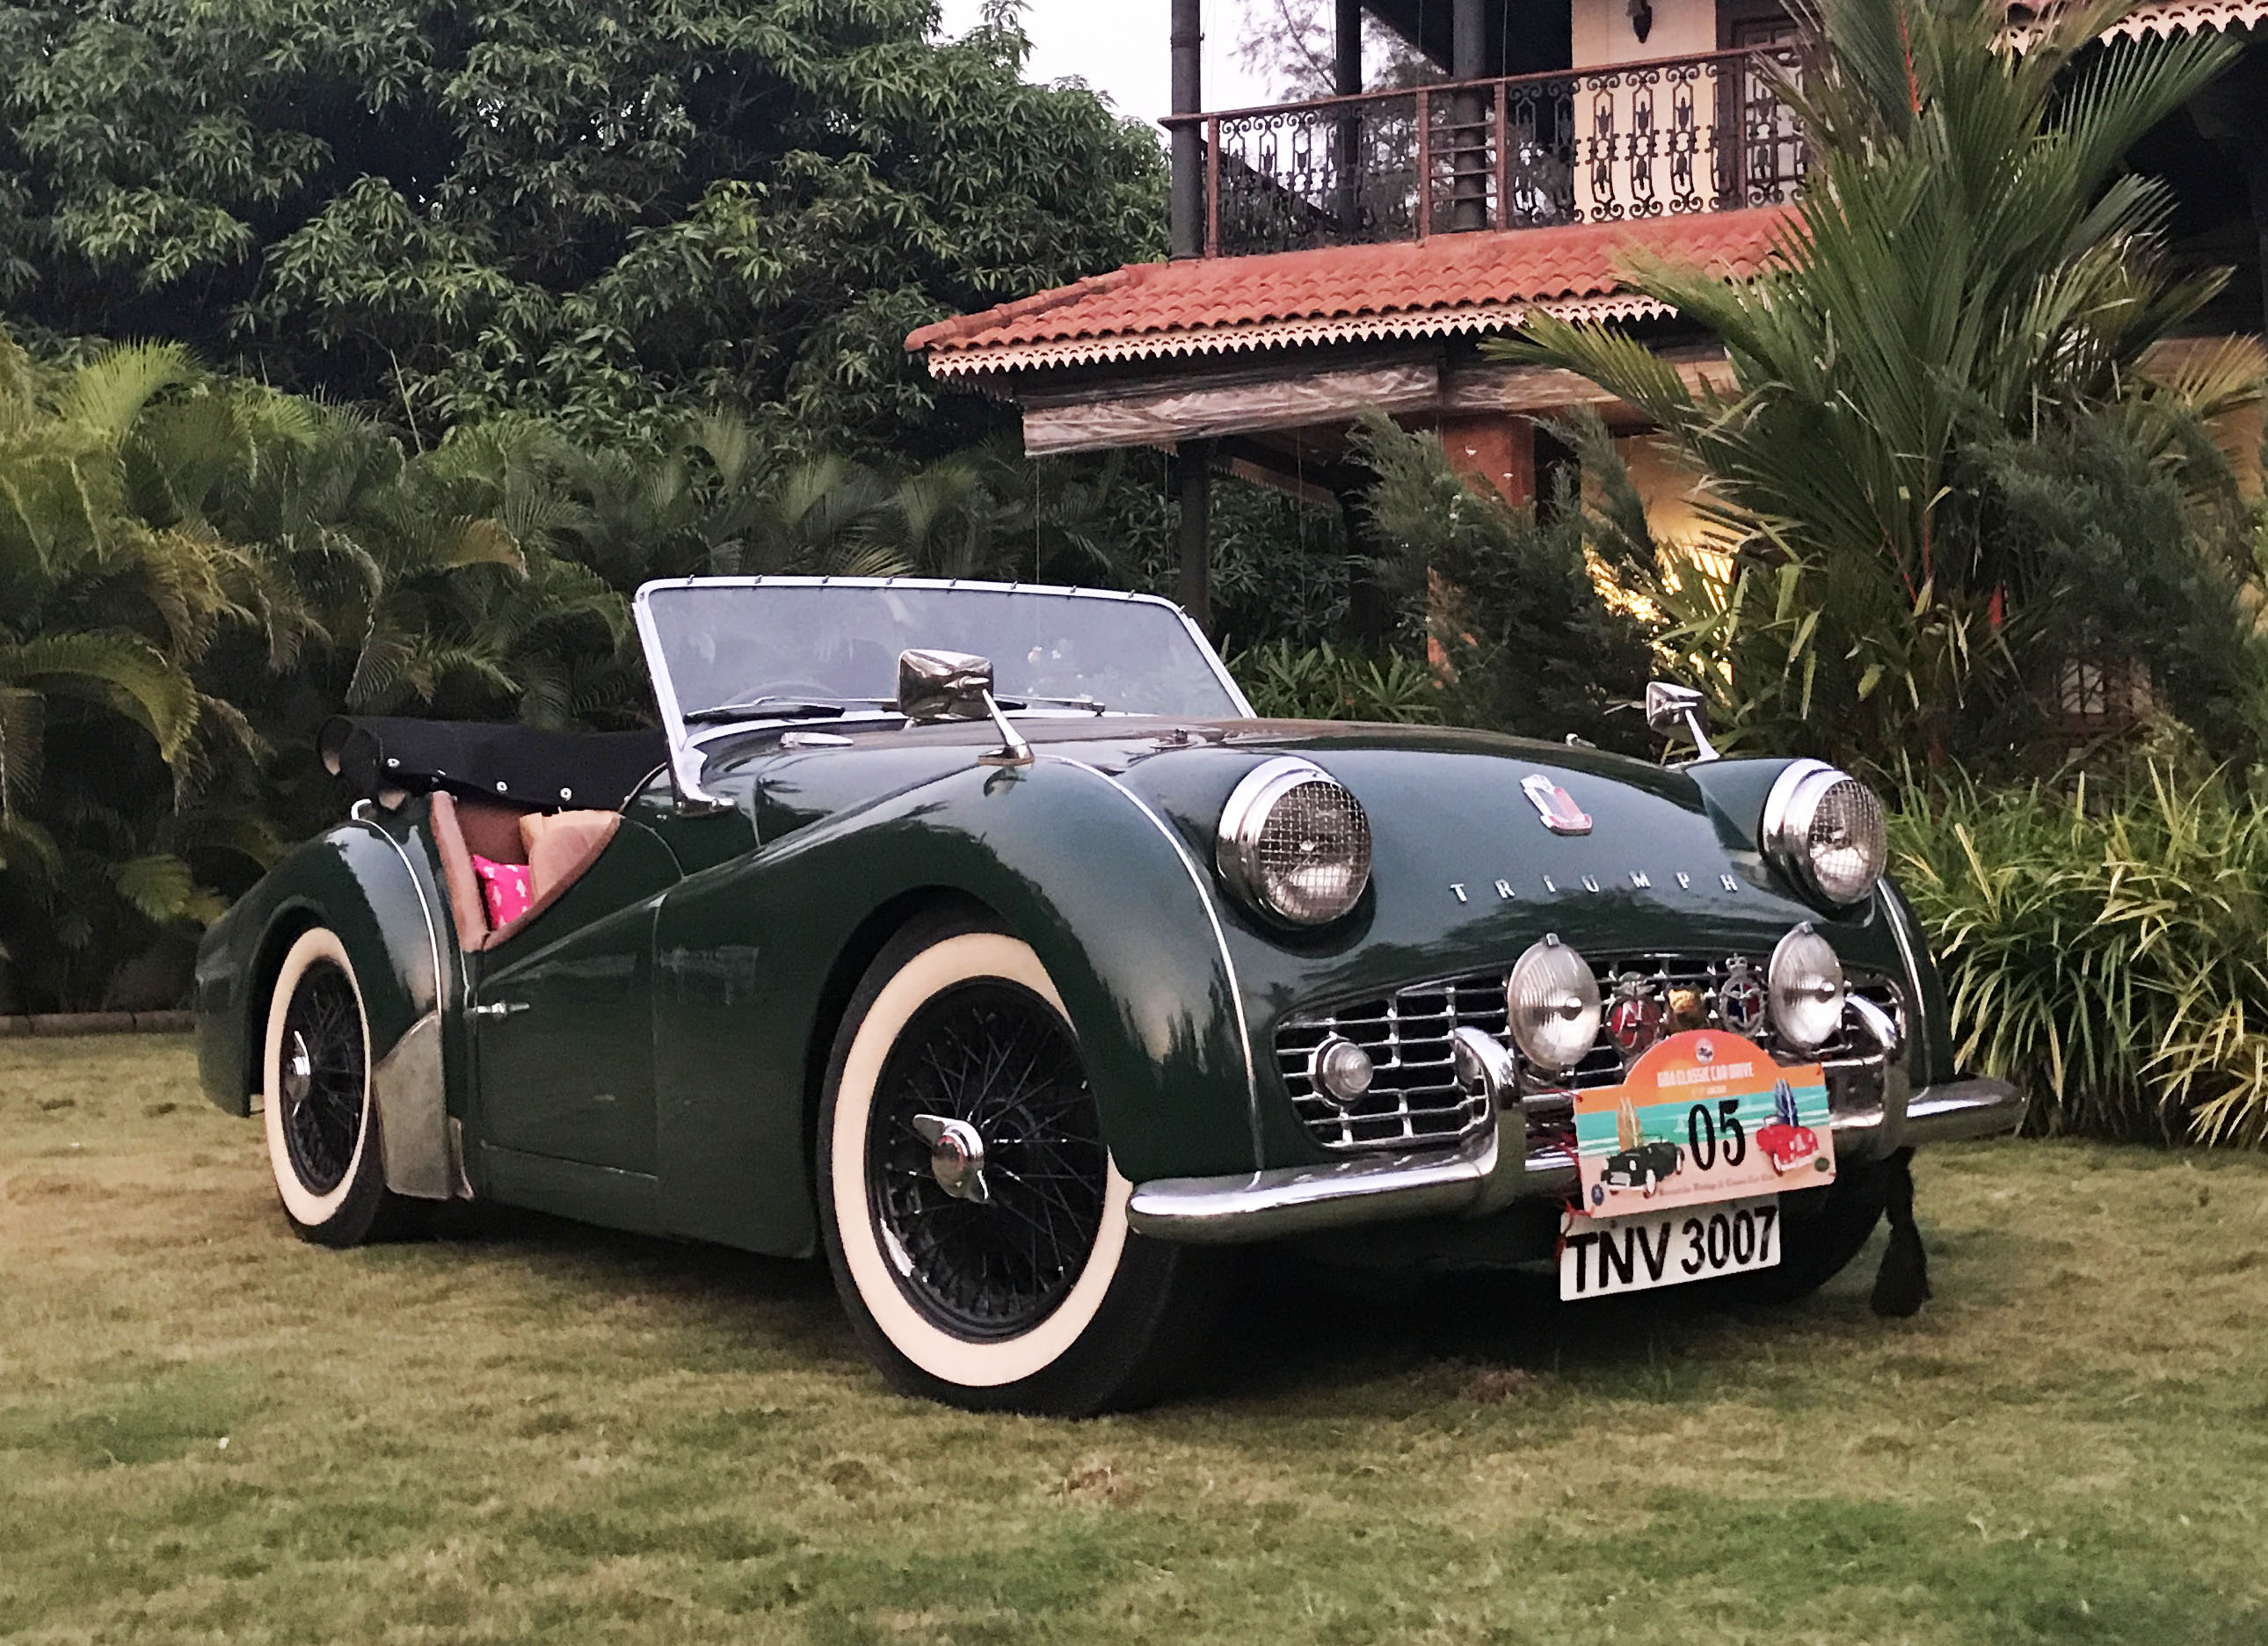 Antique Cars For Sale In Bangalore - Antique Poster